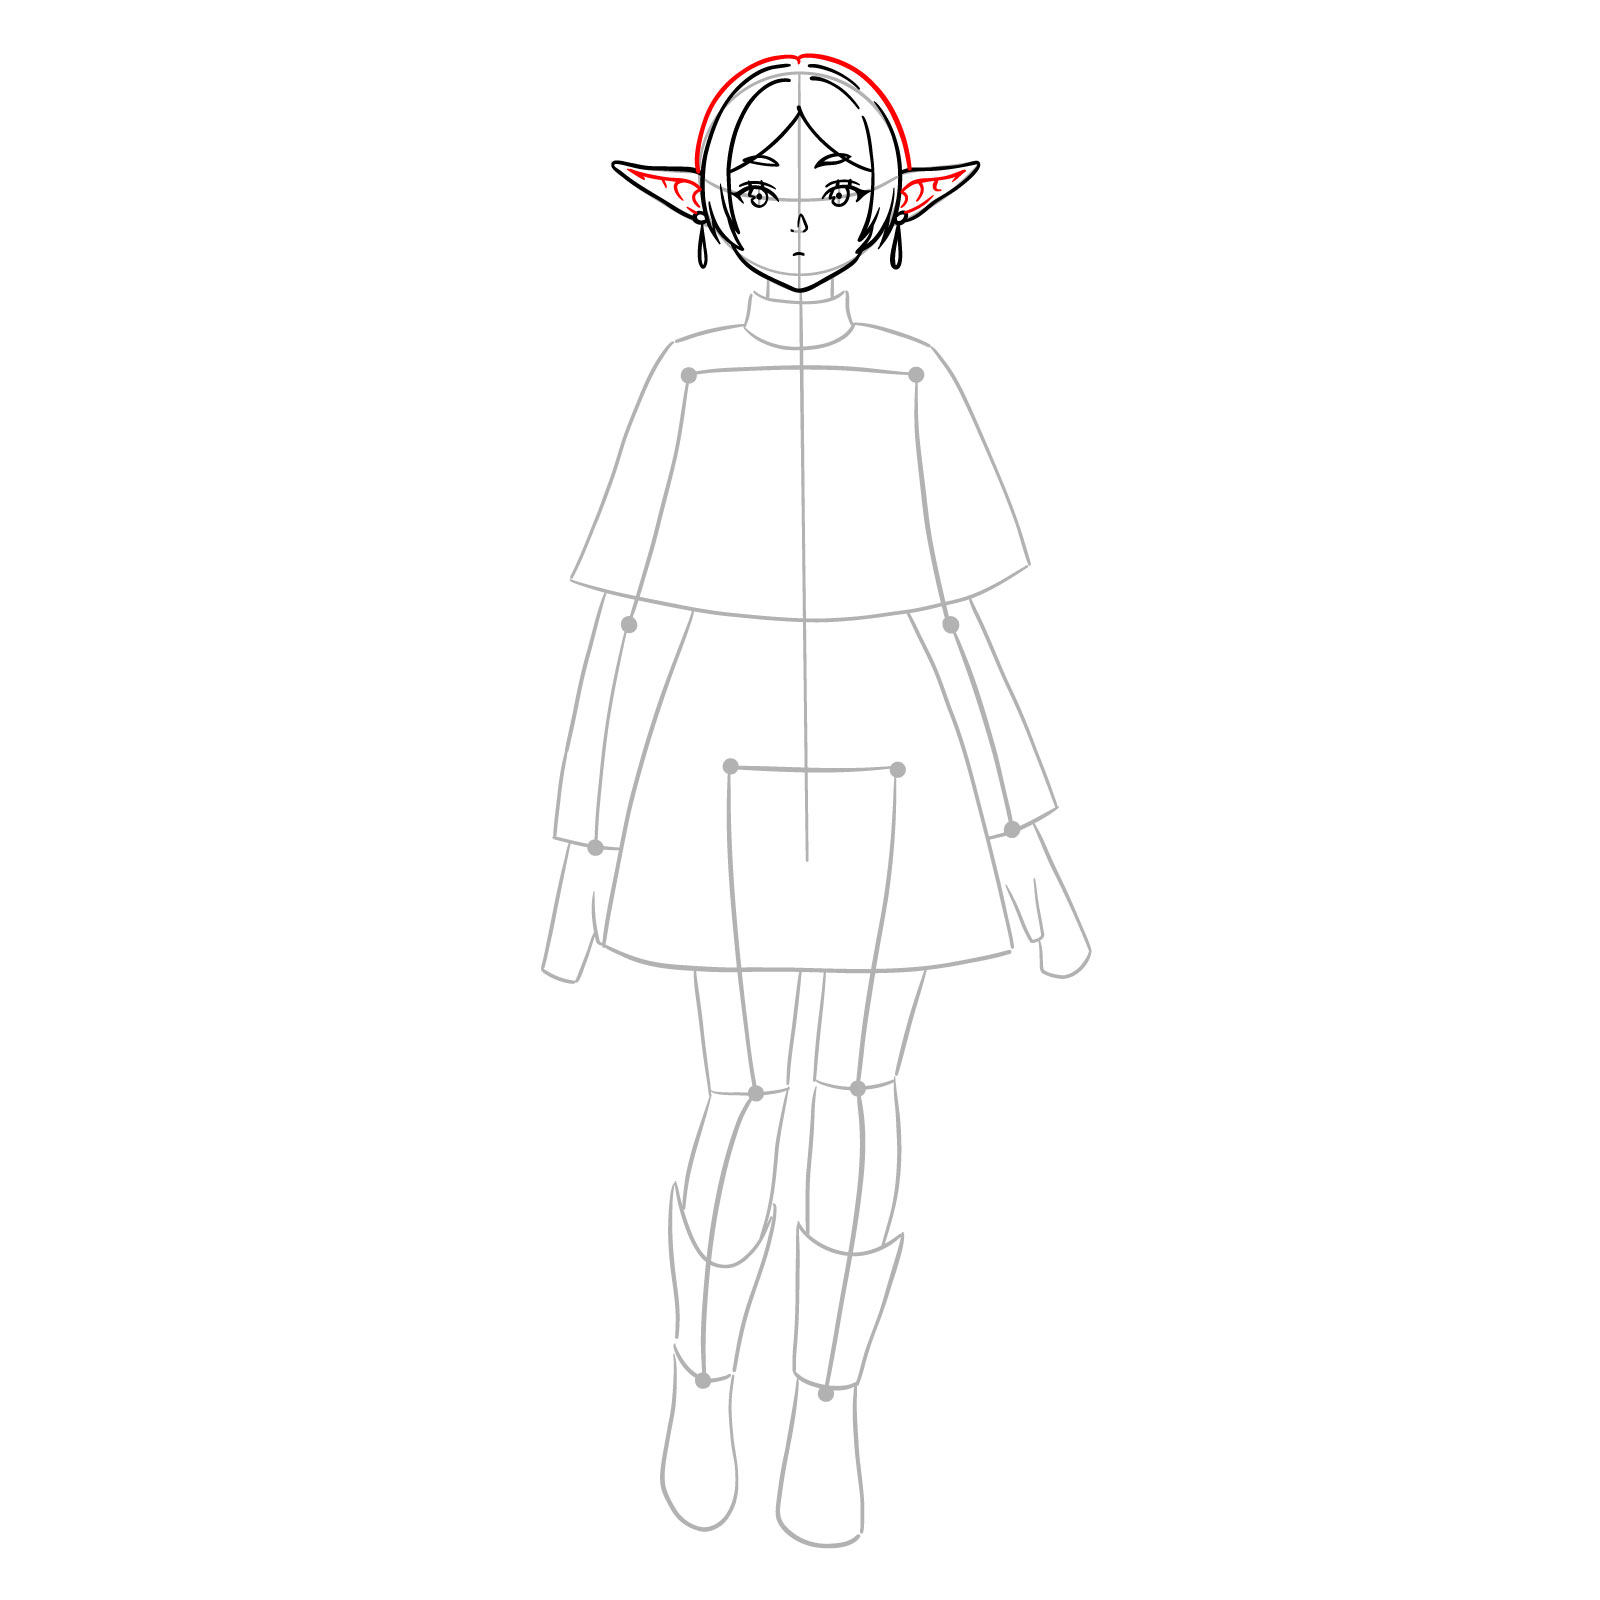 Completing the hair and ear details in Frieren's full body drawing - step 09